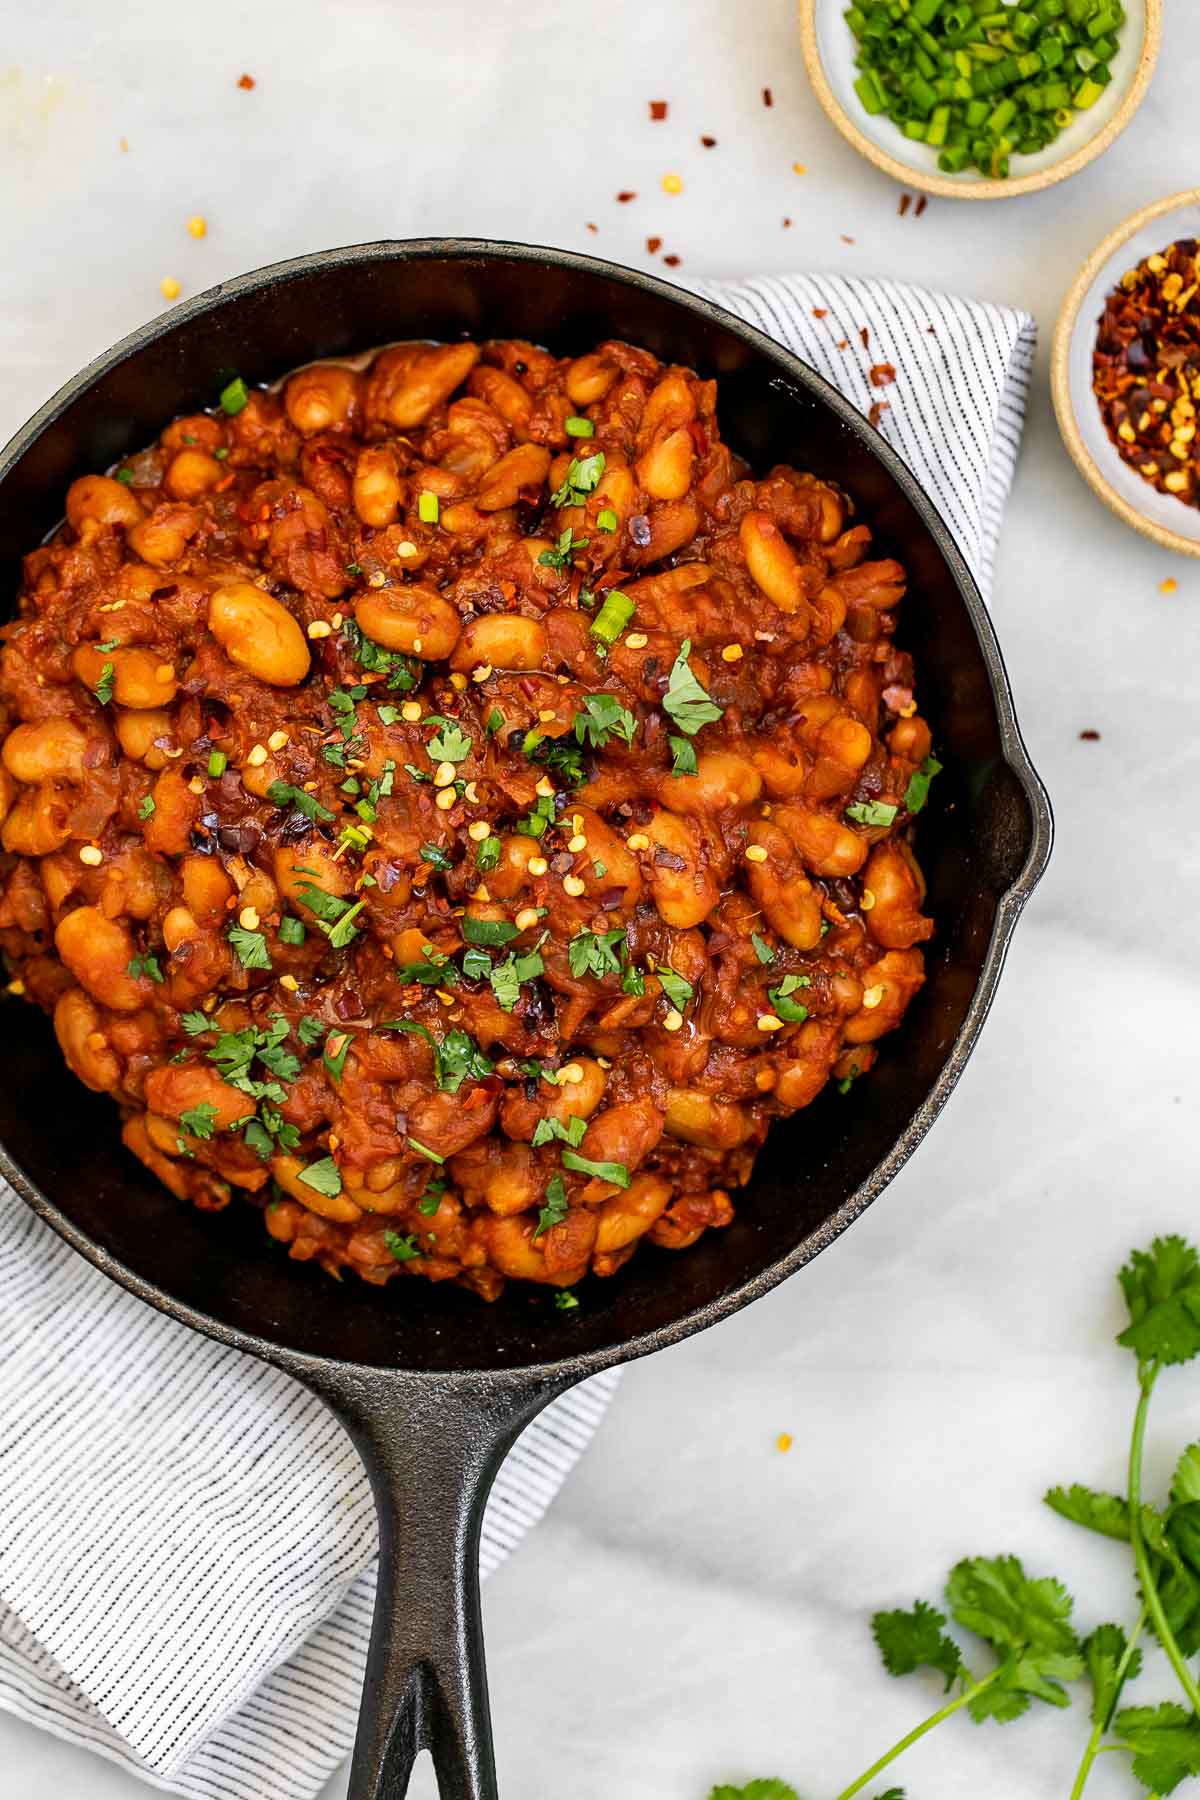 Vegan baked beans in a cast iron pan.